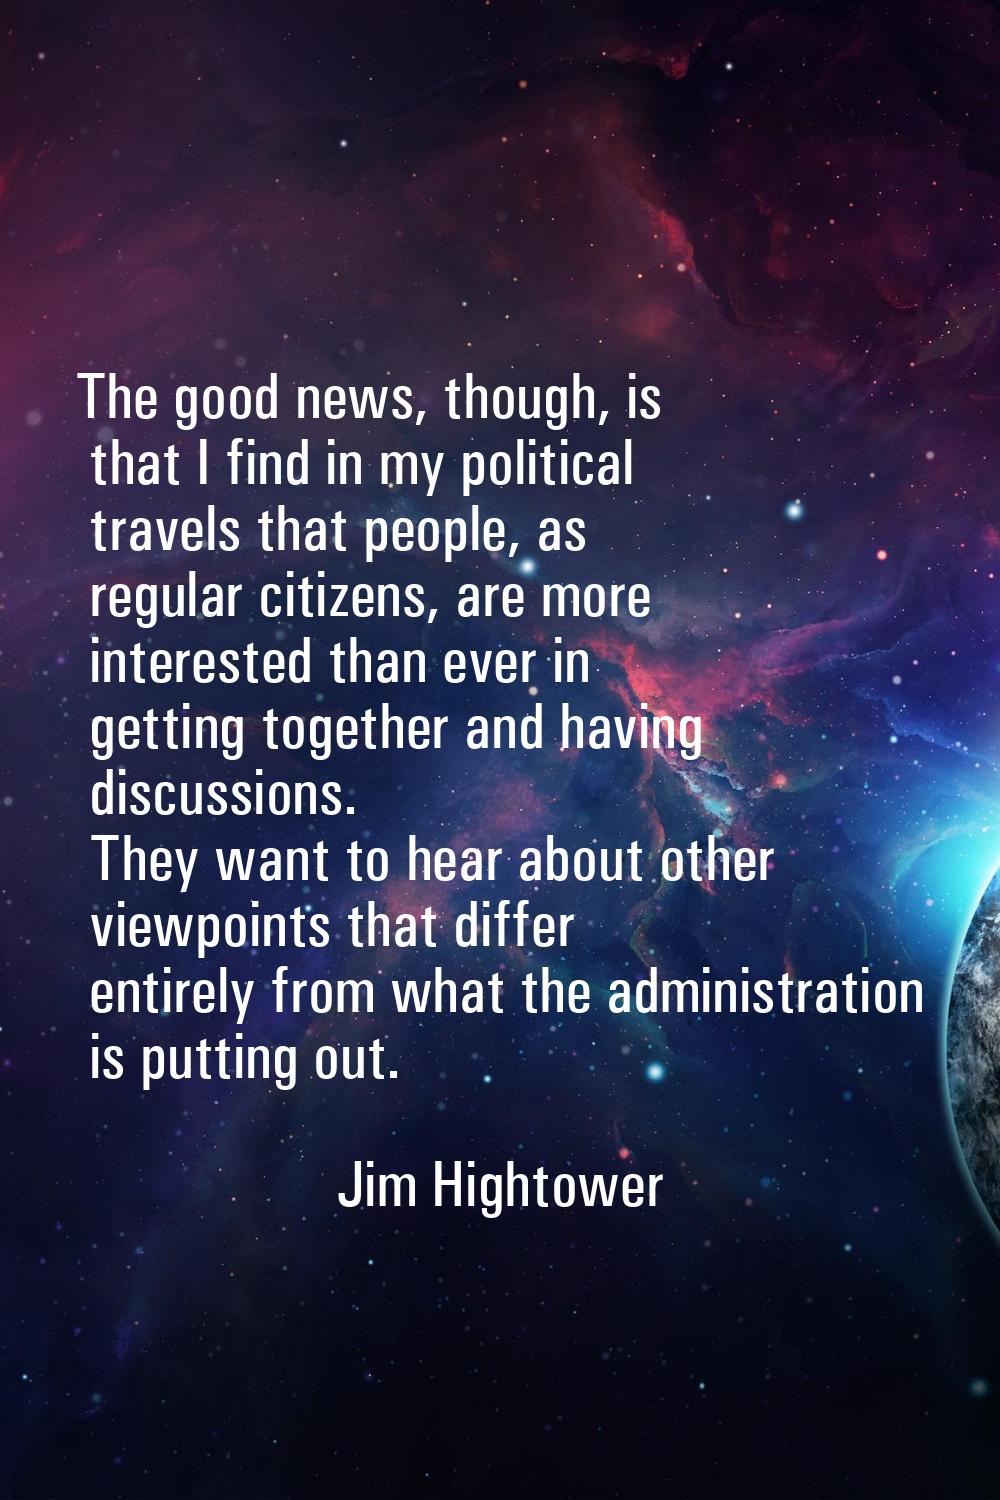 The good news, though, is that I find in my political travels that people, as regular citizens, are